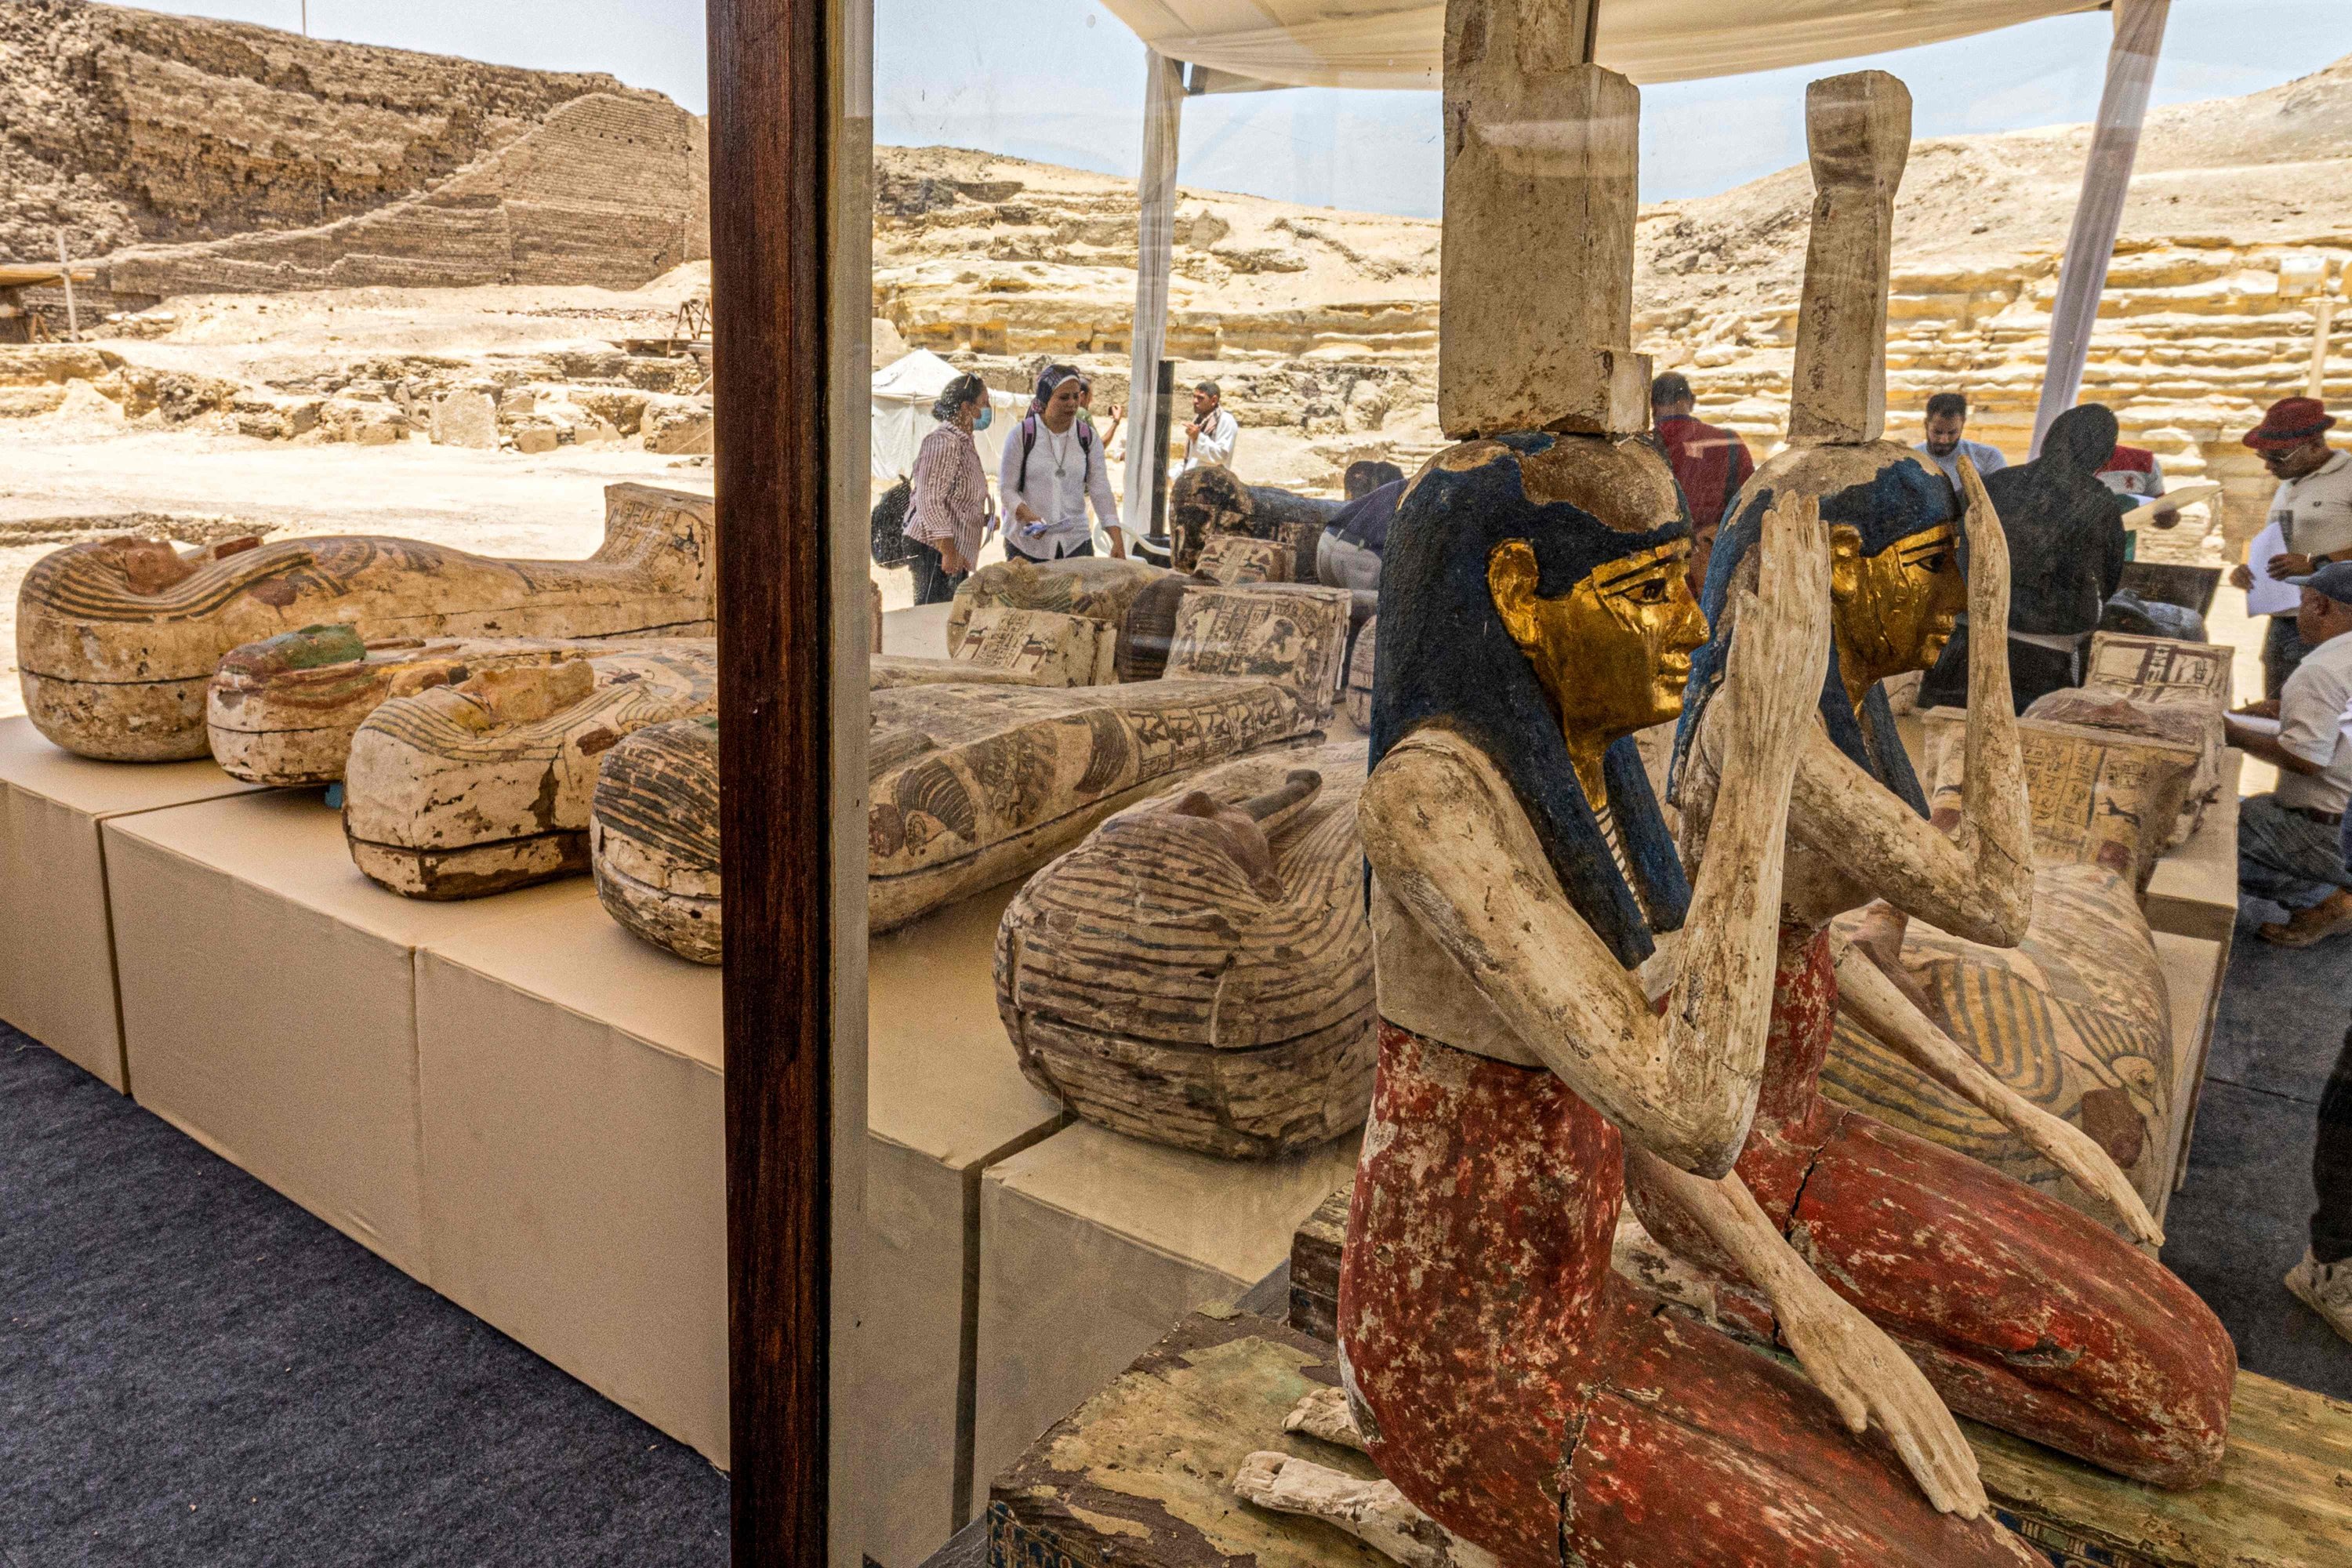 Statuettes depicting the Egyptian goddesses (L to R) Isis (Iset) and Nephthys (Nebet-Het) and other sarcophagi found in a cache dating to the Egyptian Late Period (around the fifth century BC) are displayed after their discovery by a mission headed by Egypt's Supreme Council of Antiquities, at the Bubastian cemetery at the Saqqara necropolis, Cairo, Egypt, May 30, 2022. (AFP Photo)